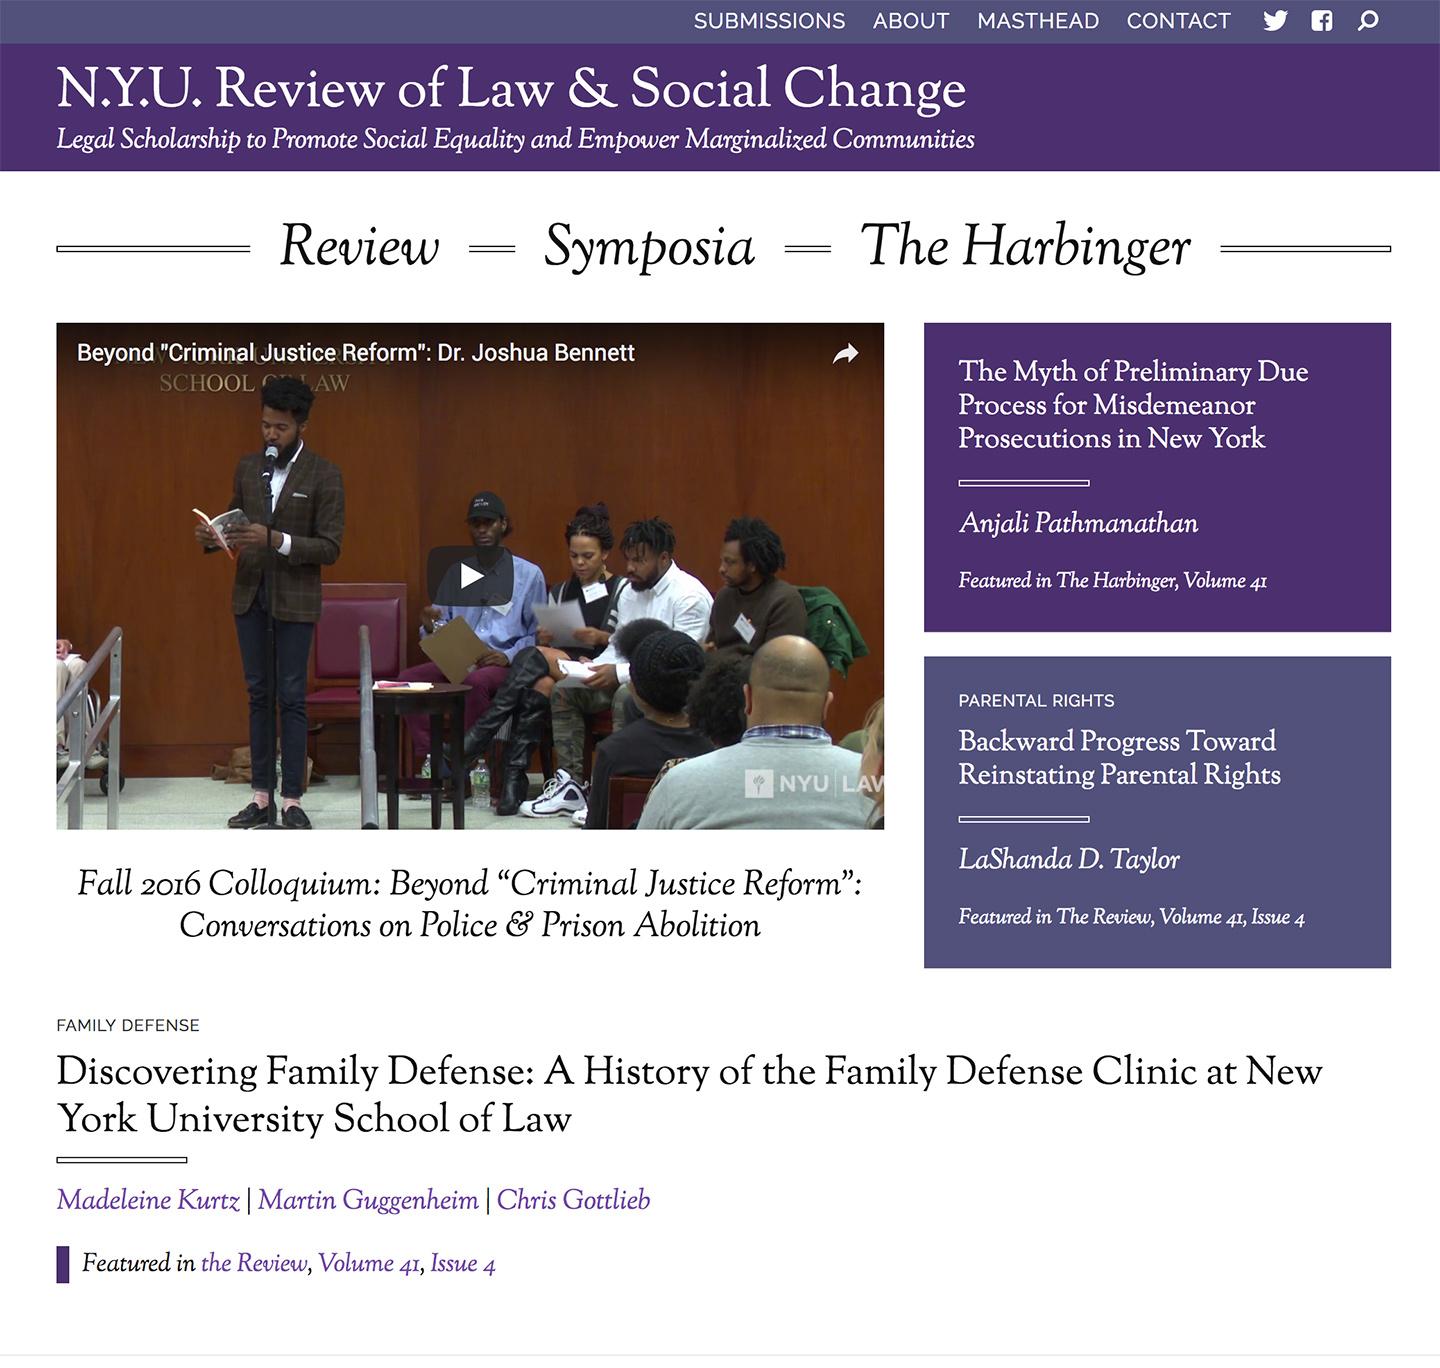 NYU: Review of Law and Social Change: RLSC Homepage